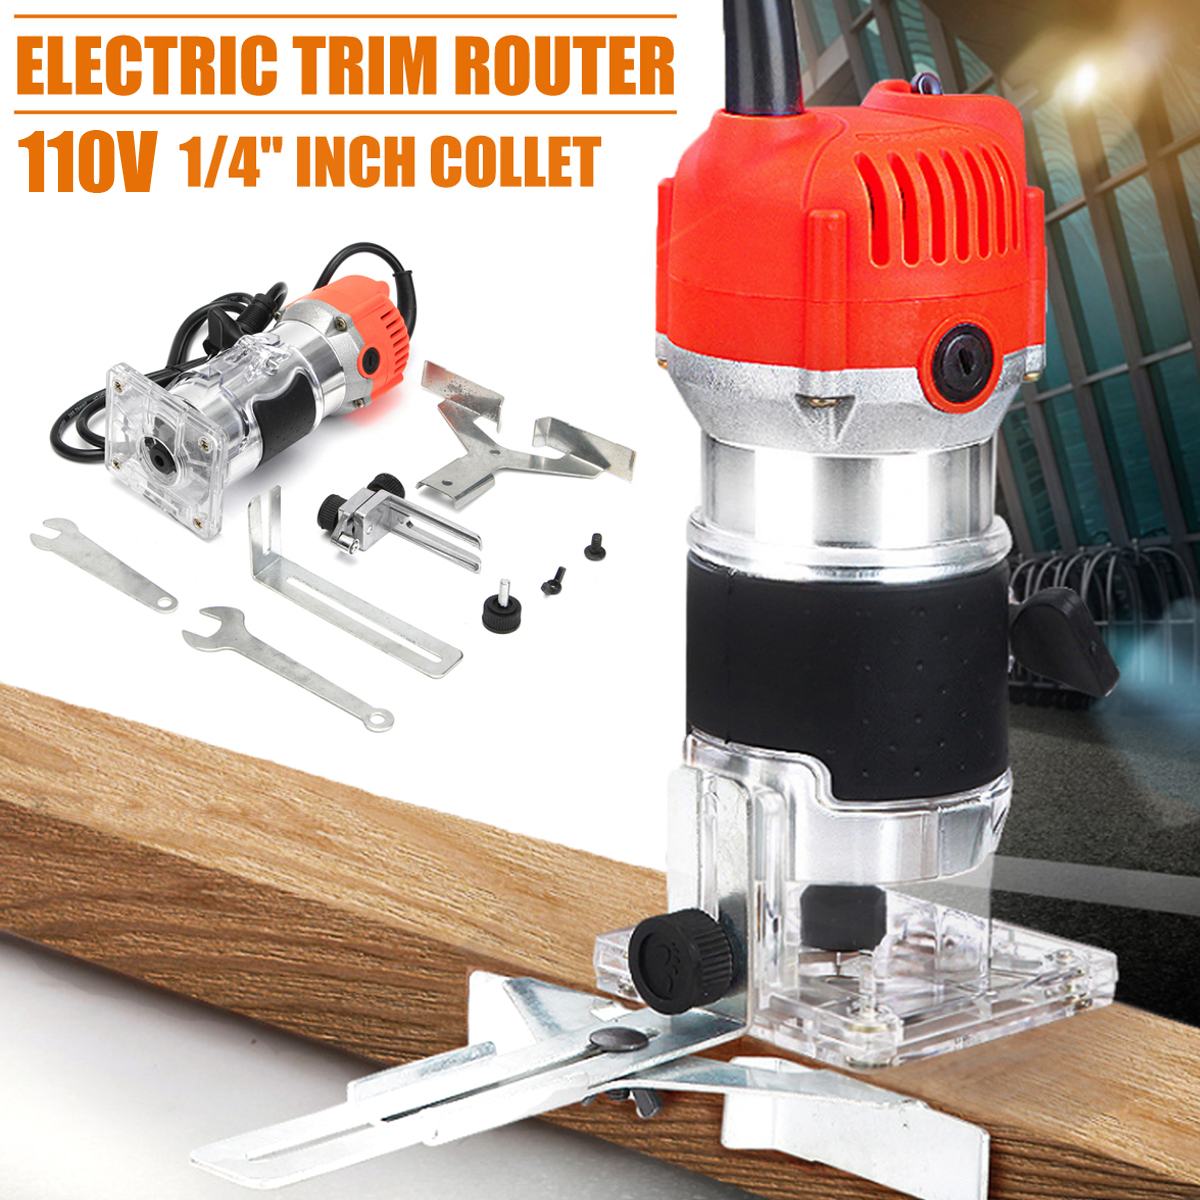 110V220V-680W-Trim-Router-Edge-Woodworking-Wood-Clean-Cuts-Power-Tool-Set-33000RPM-with-Box-1245528-2